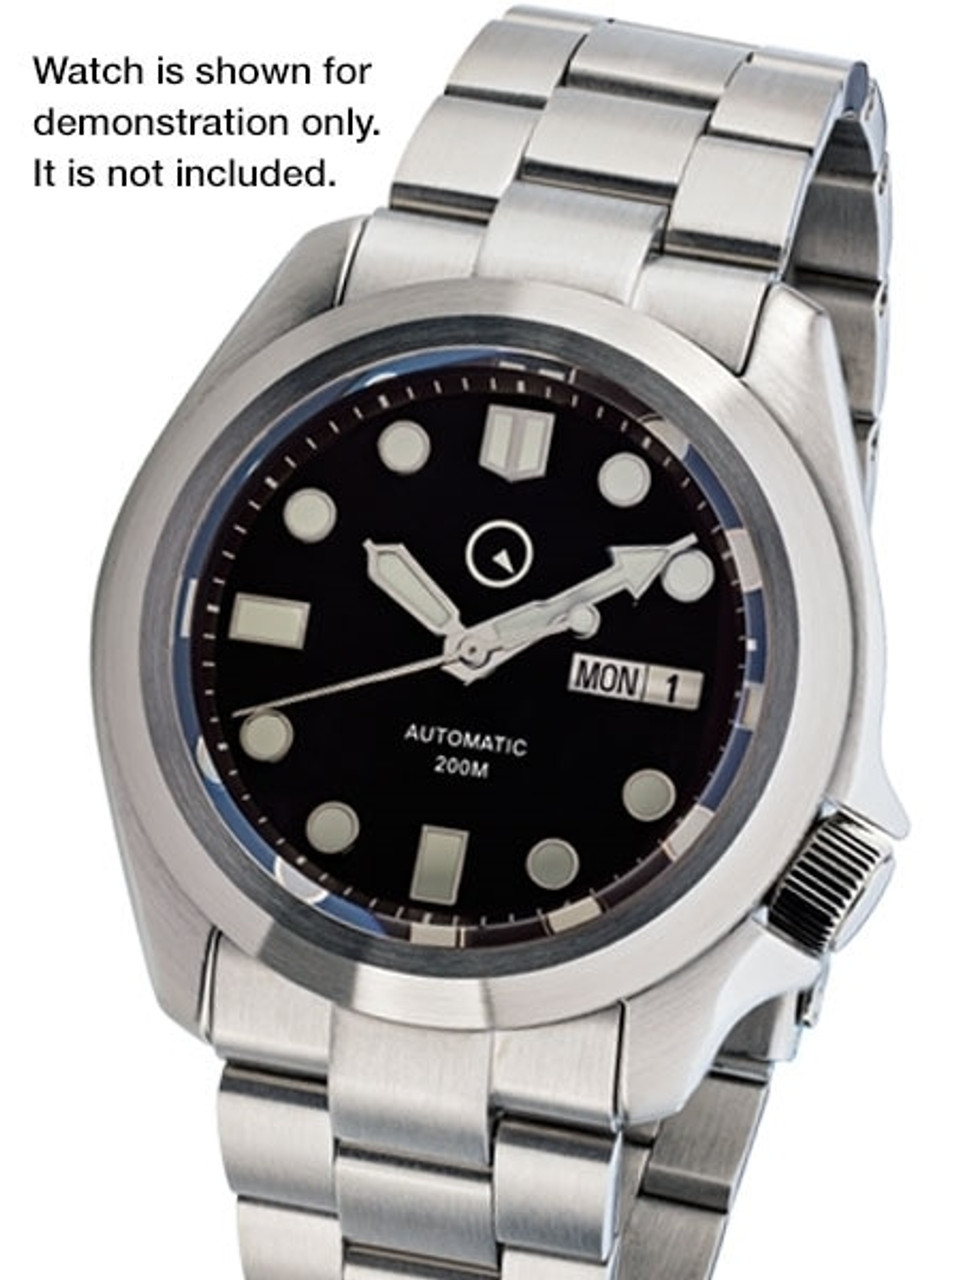 Brushed Finish SS, Unmarked Bezel for Seiko SKX007, SKX009 and Islander  43mm dive watches #B13-M